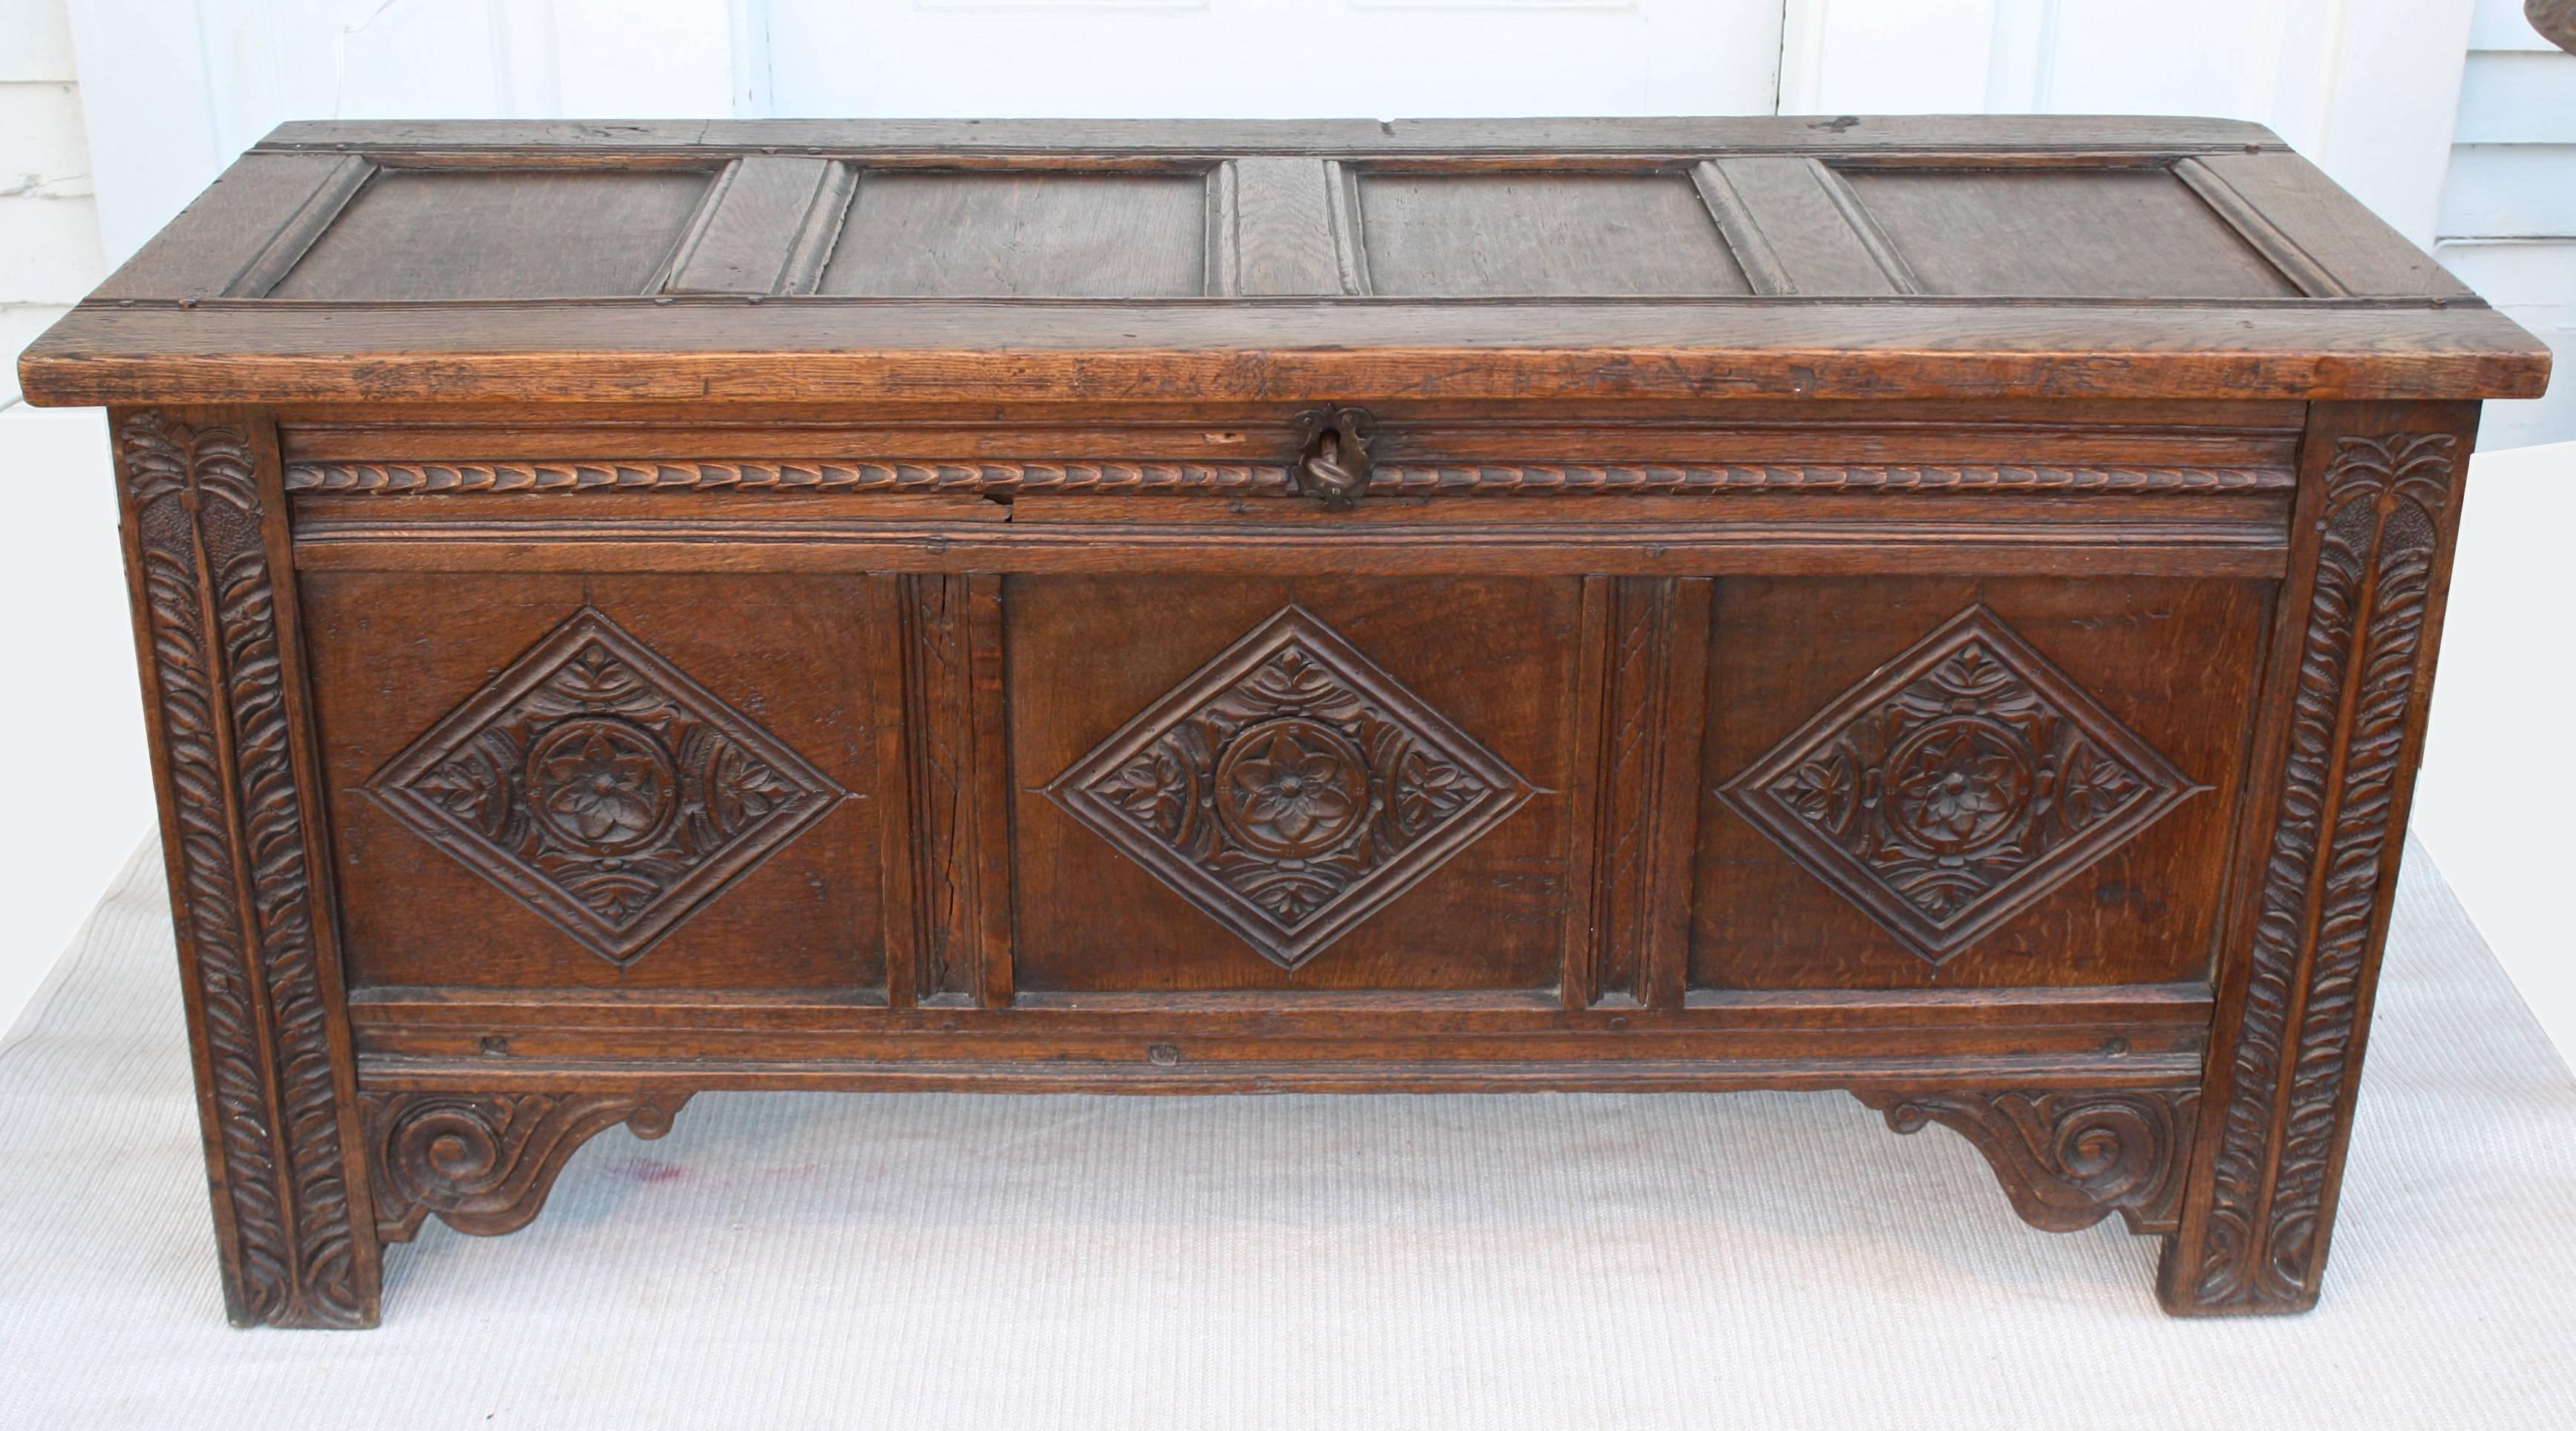 A hand-carved oak Charles II Restoration Period coffer or blanket chest, with a working keyed lock. Its sides and top are paneled. Its front has three large foliate carved diamond panels and distinctive vine carved corner column facings.